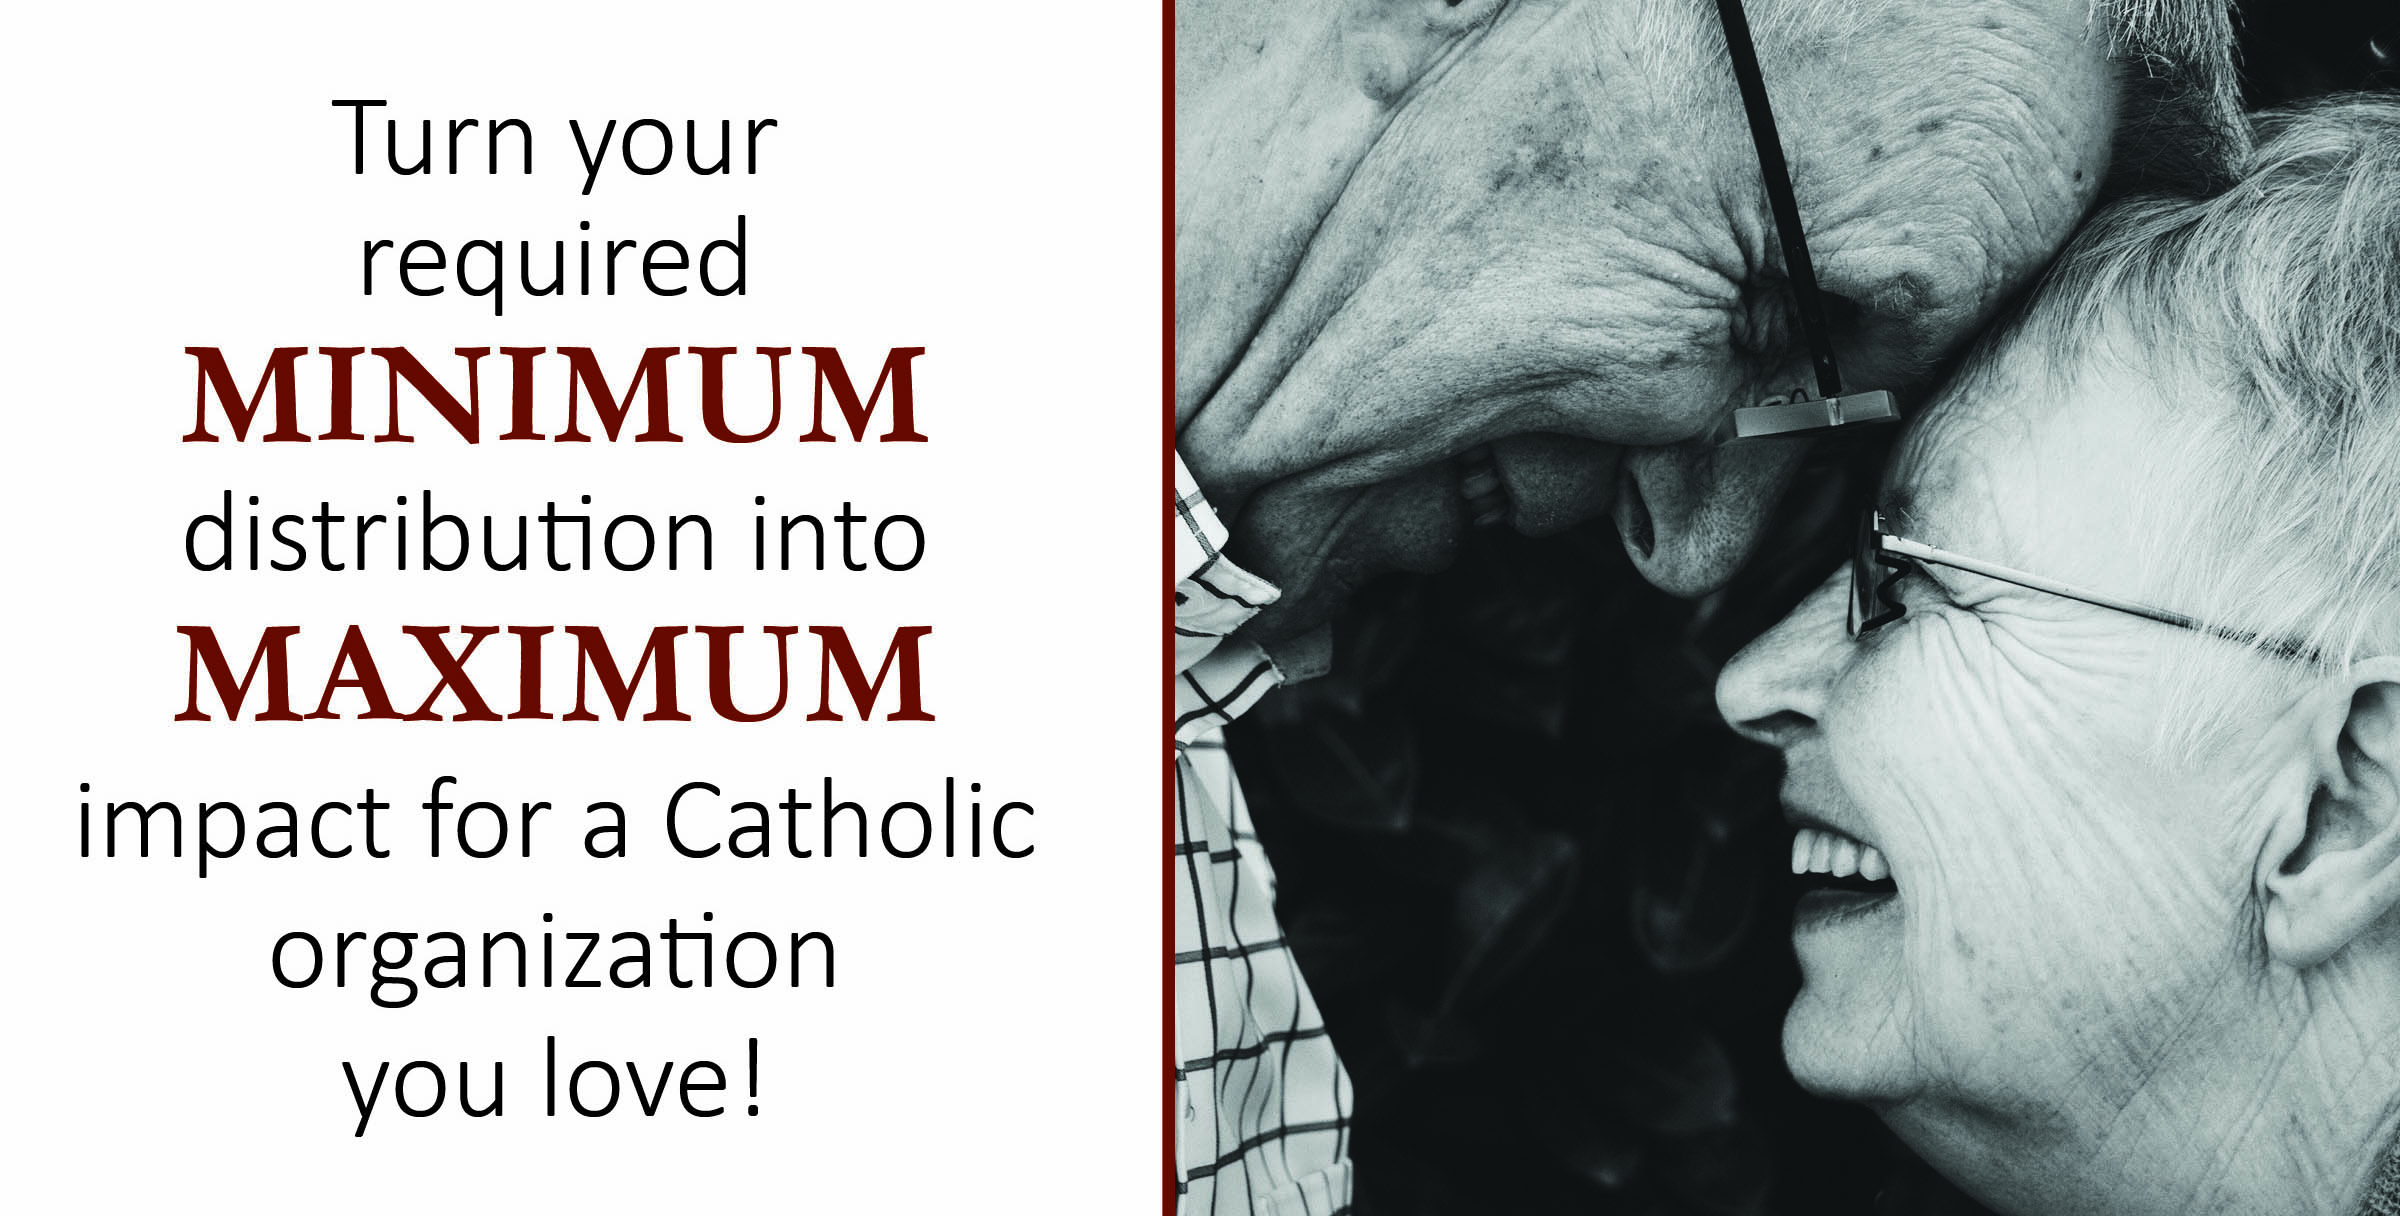 Turn your required minimum distribution into maximum impact for a Catholic organization you love!